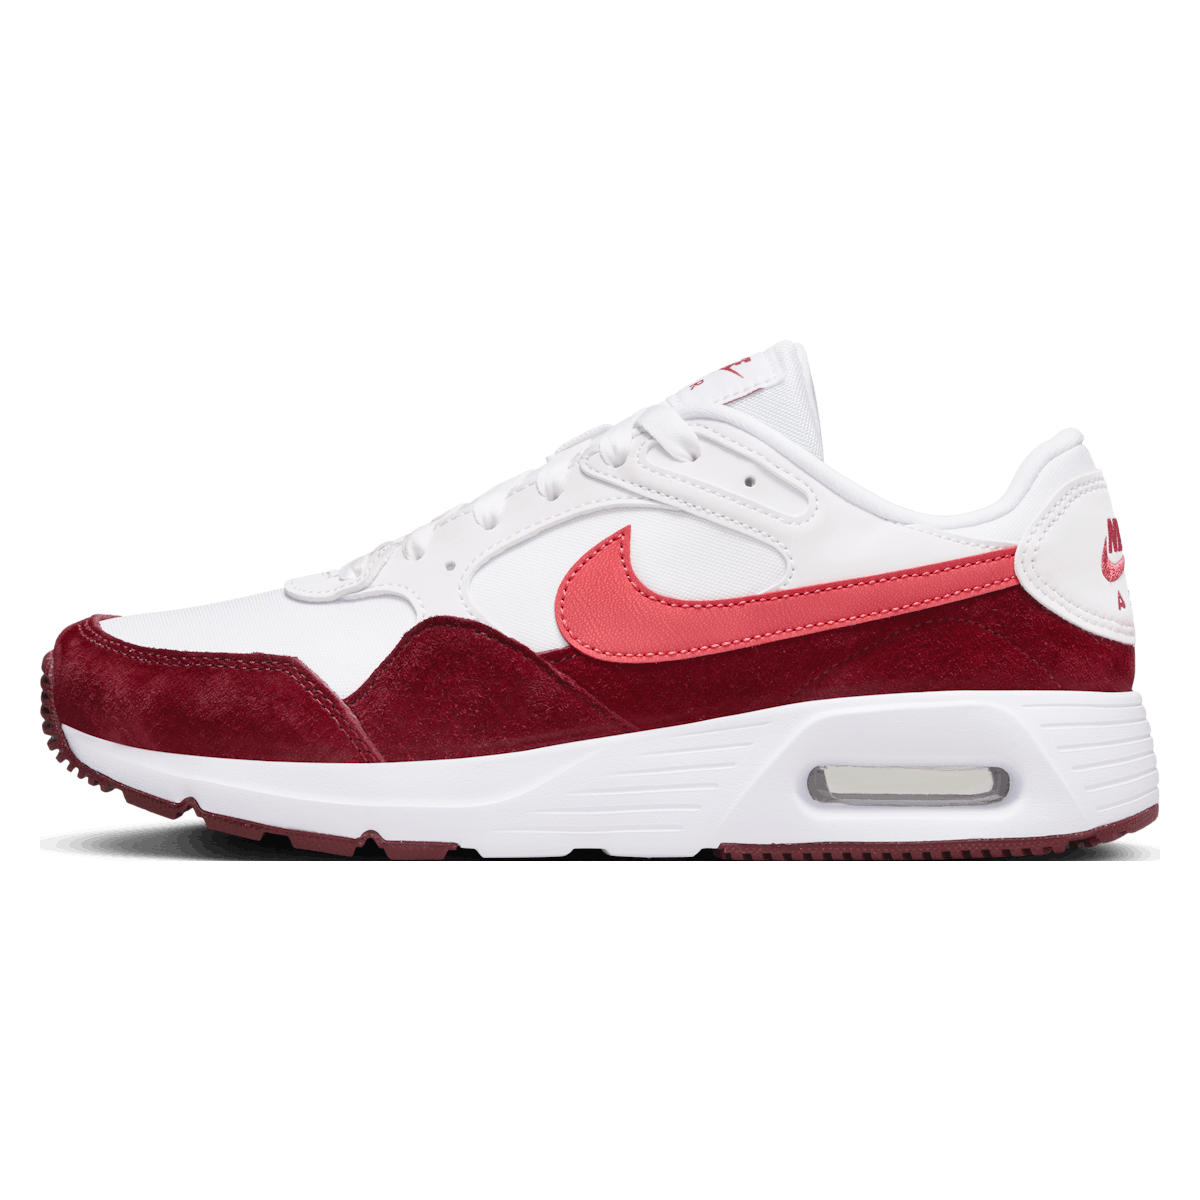 Nike Air Max SC Wmns "Valentine’s Day"